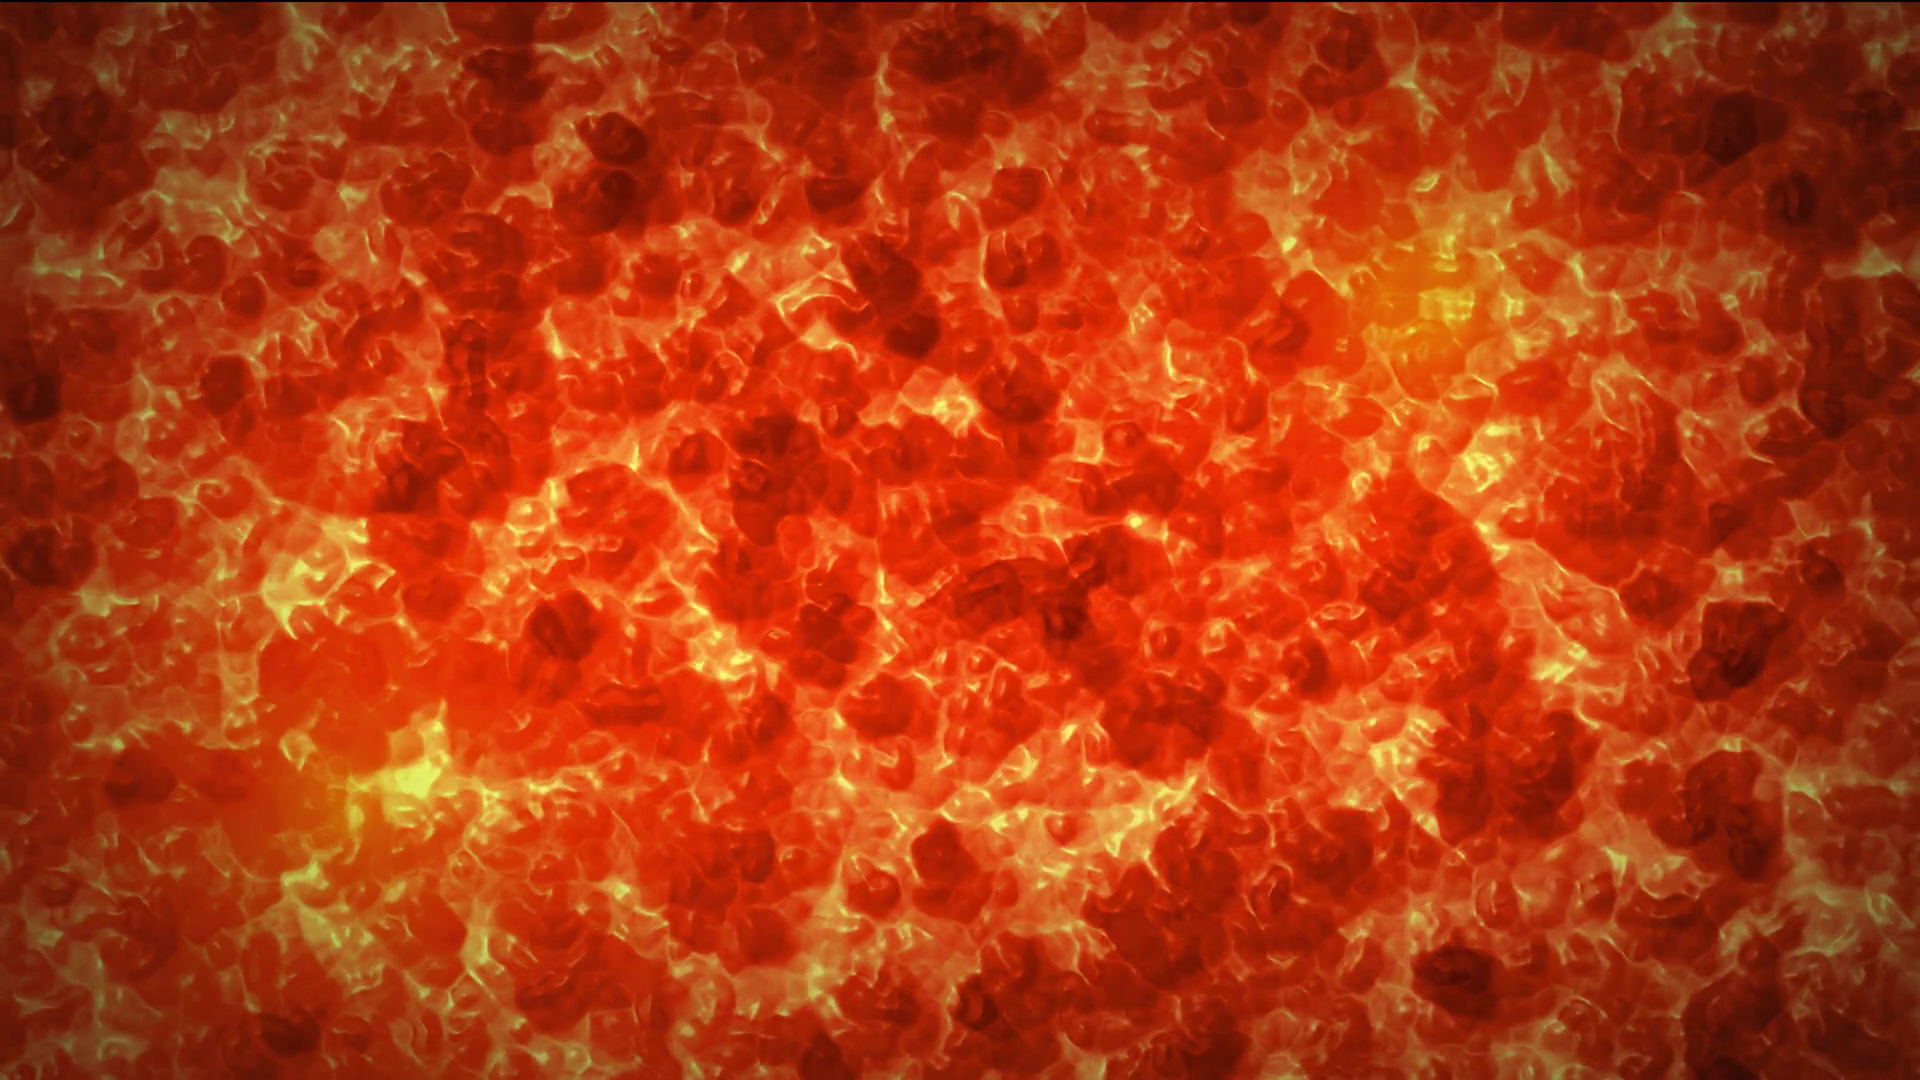 Free photo: Red Fire Texture, Burned, Burning